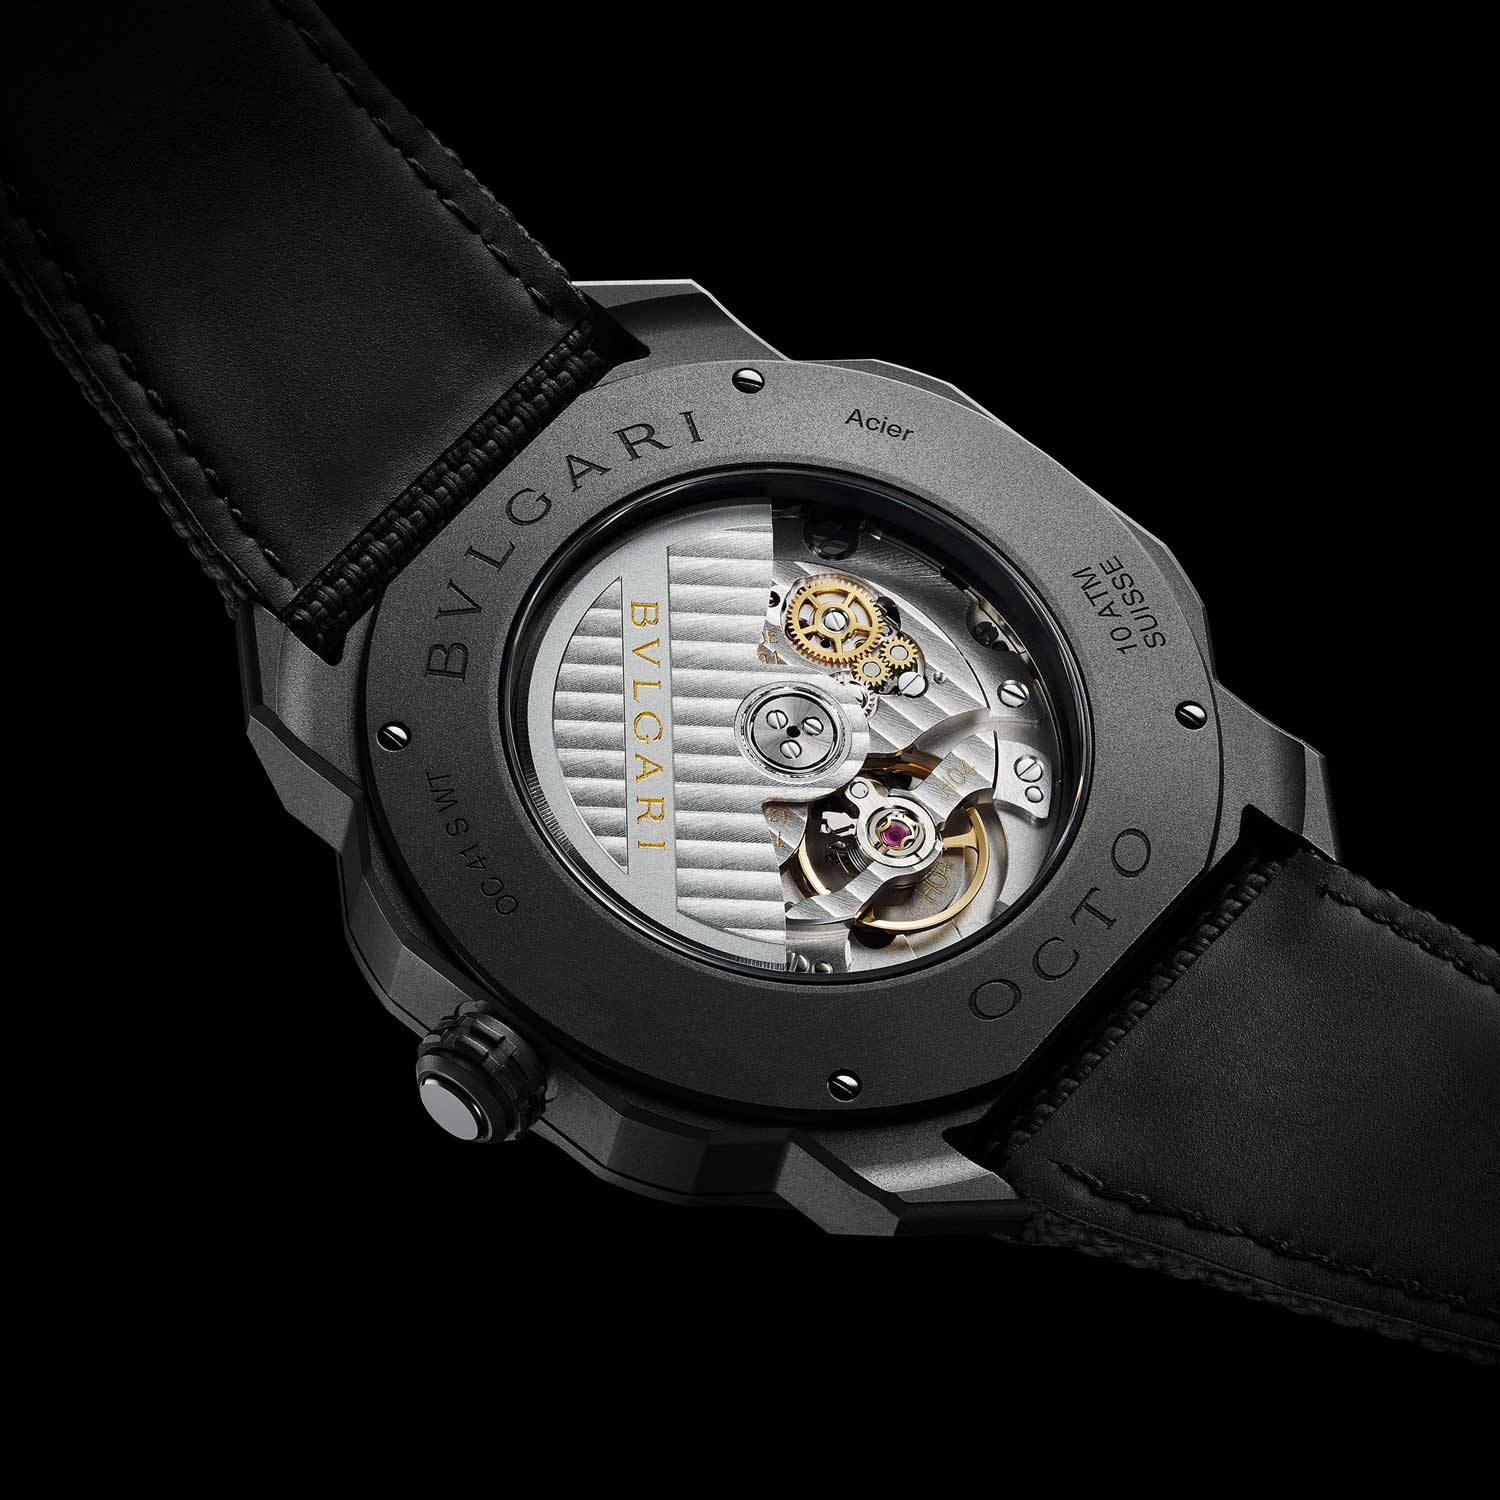 The watch is powered by the in-house calibre BVL257.